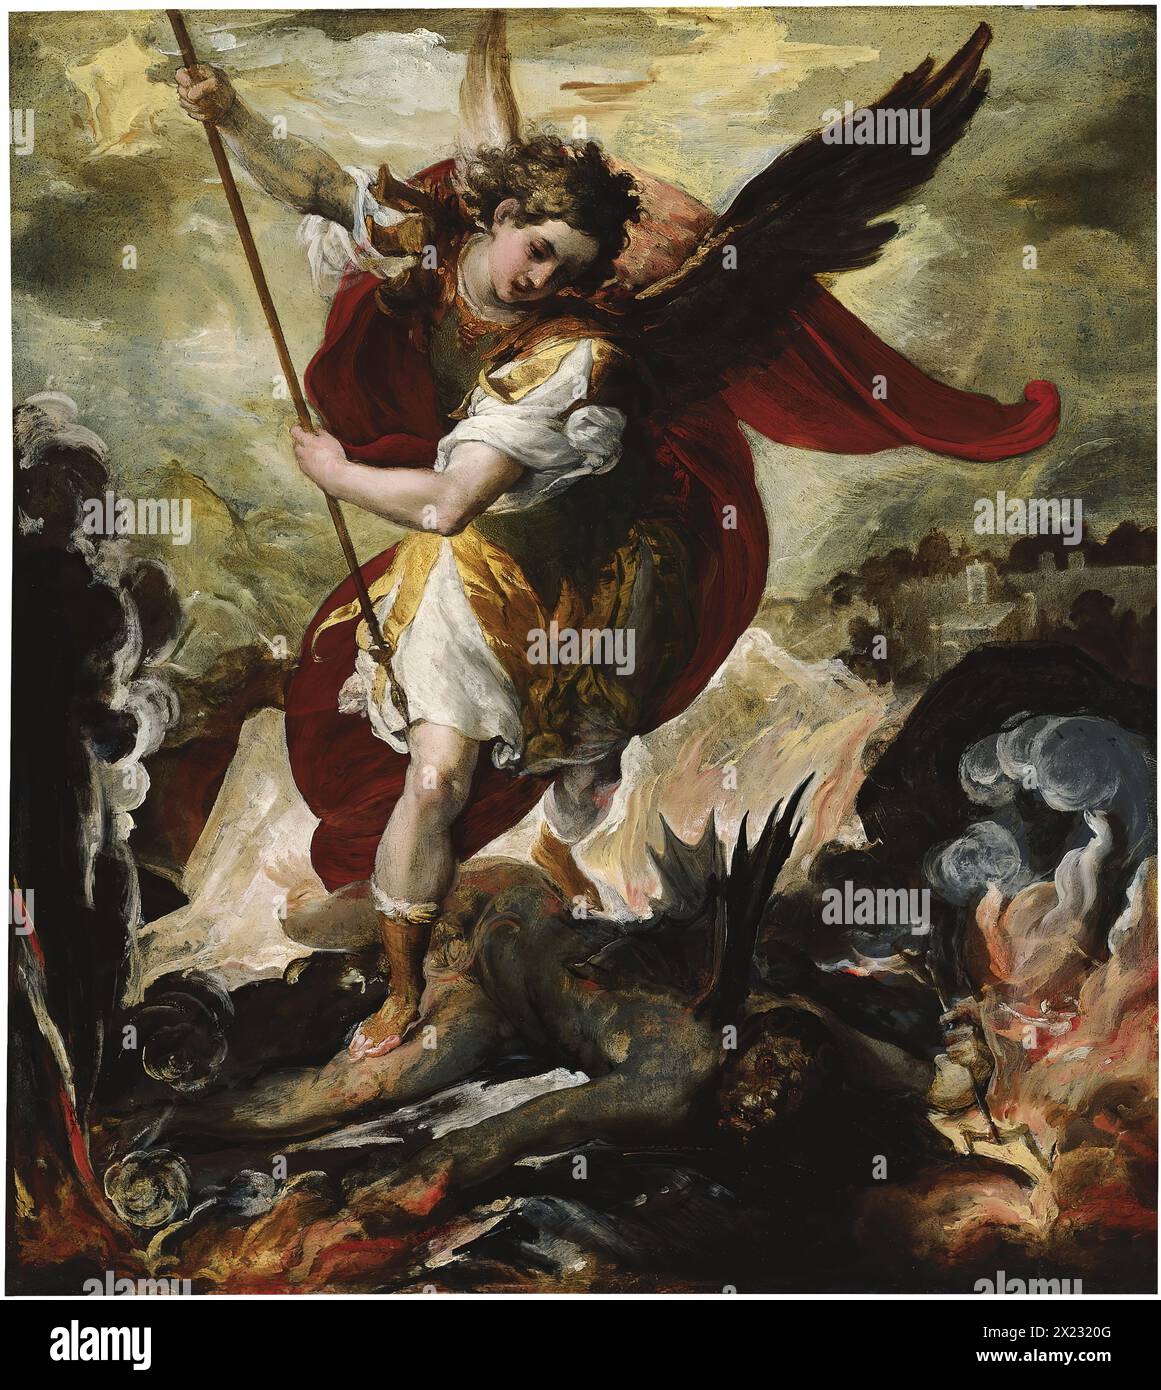 The Archangel Michael overthrowing Lucifer, 1656. Stock Photo